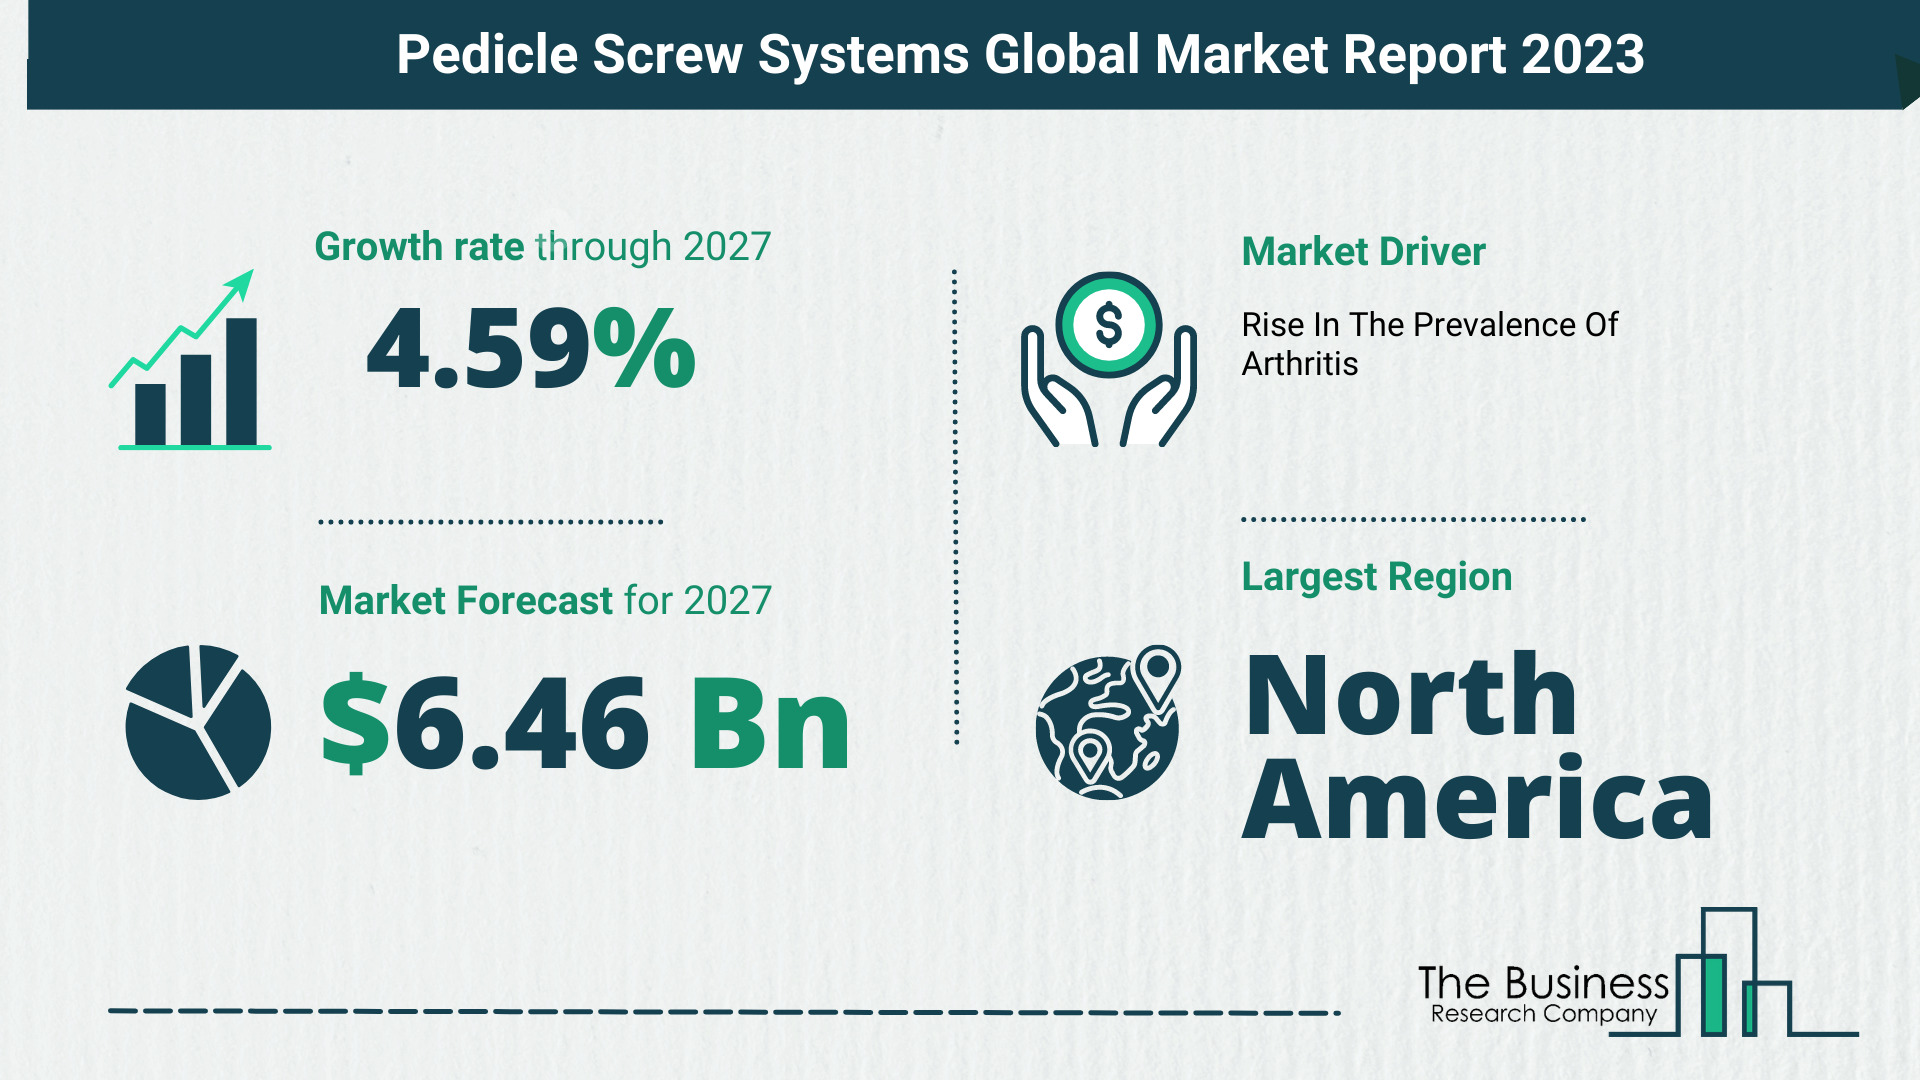 How Will The Pedicle Screw Systems Market Globally Expand In 2023?